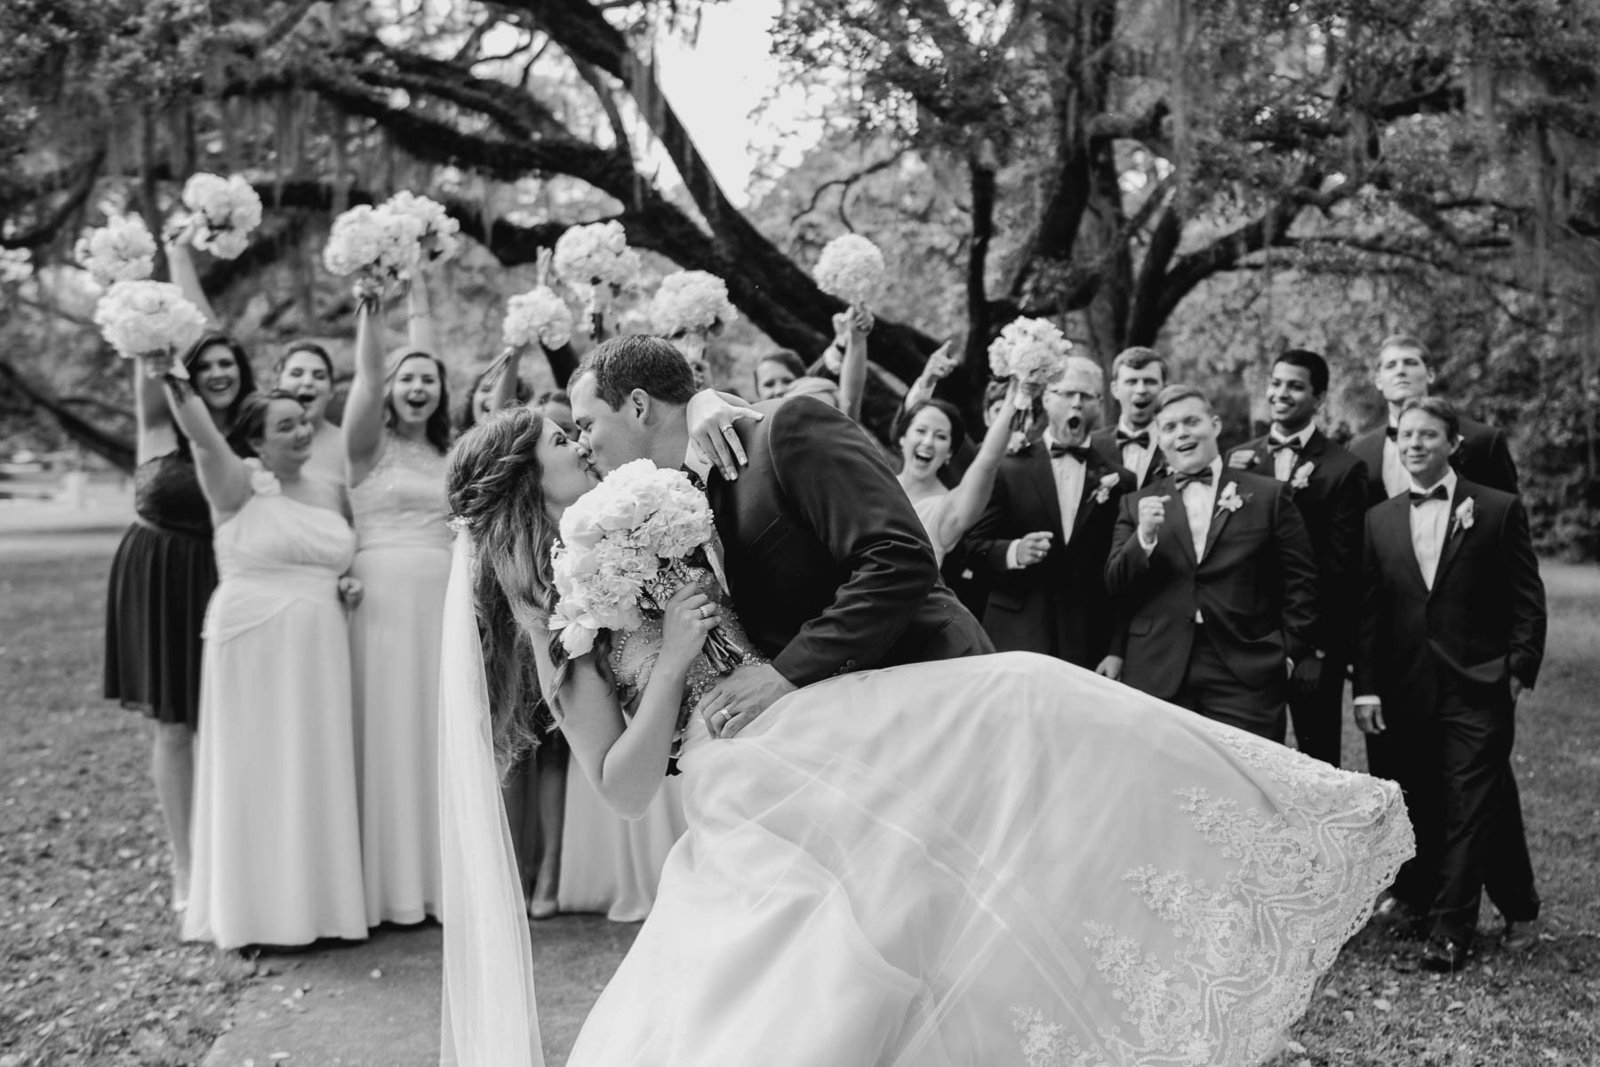 Bride and groom kiss while wedding party cheers, Brookgreen Gardens, Murrells Inlet, South Carolina